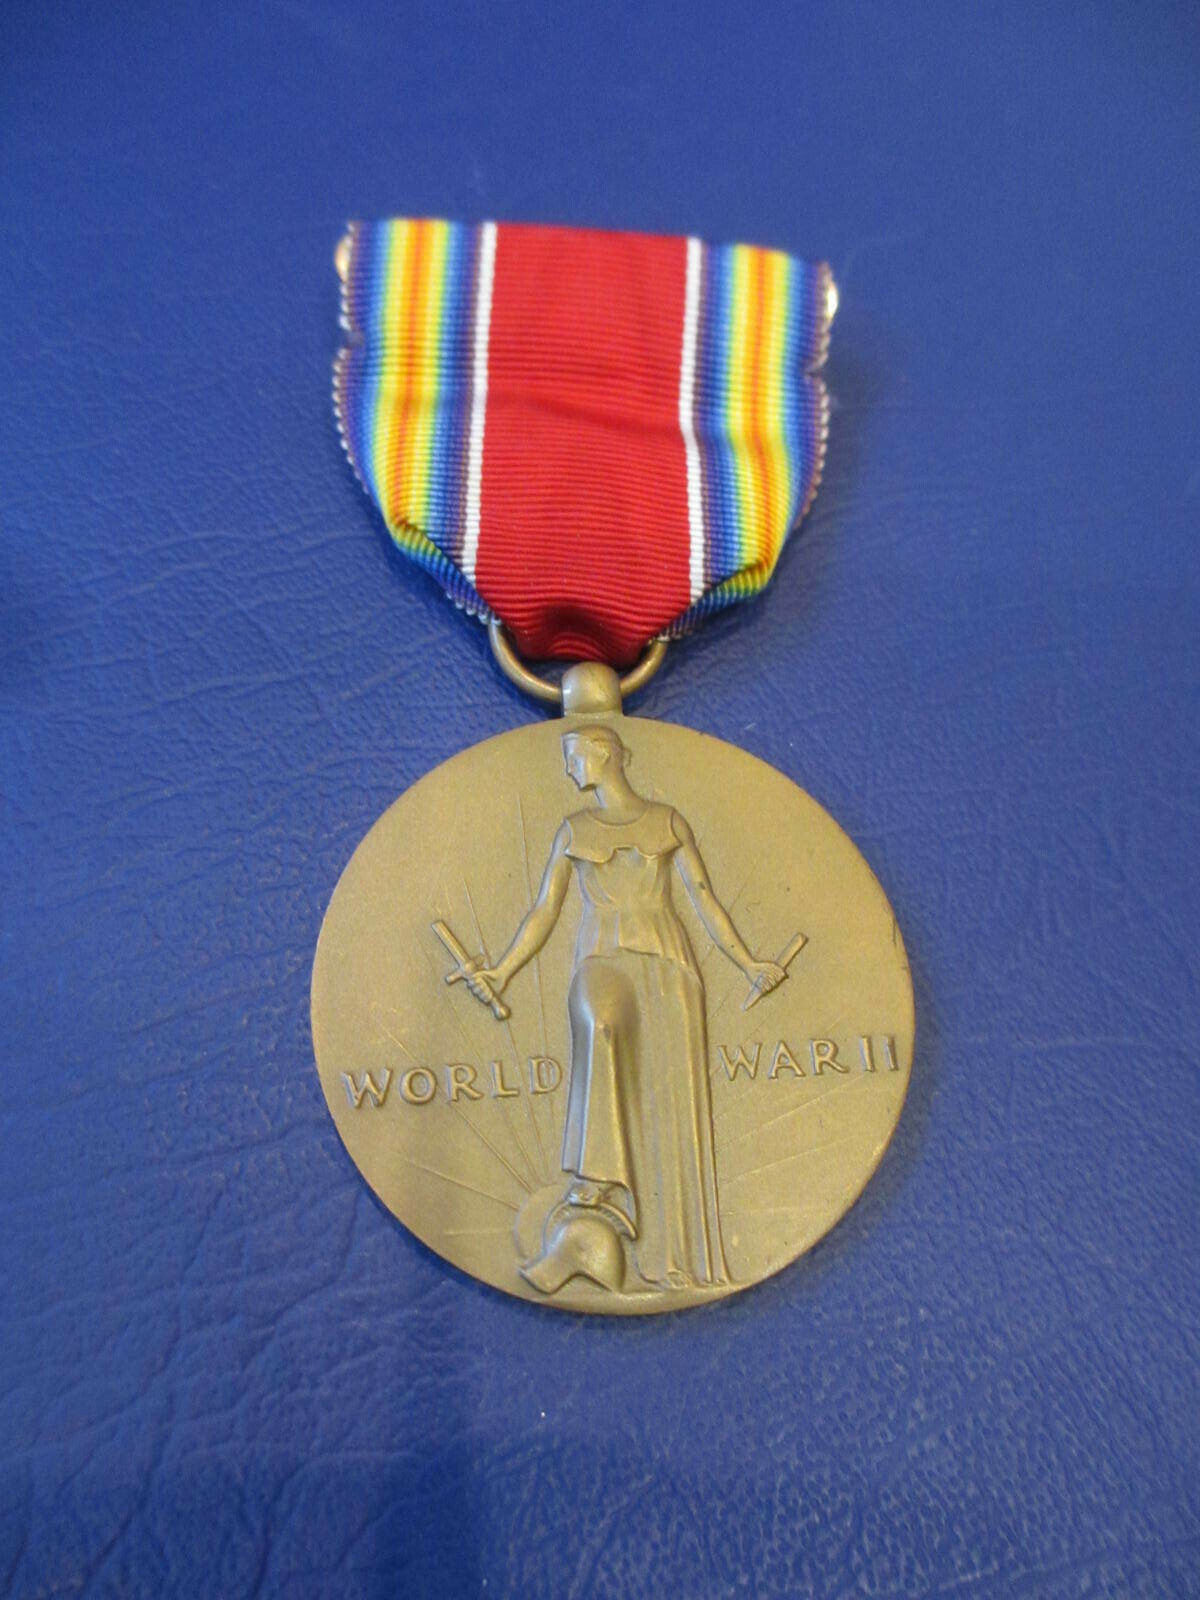  Authentic WWII U.S. United States VICTORY CAMPAIGN SERVICE MEDAL 1941-1945 *